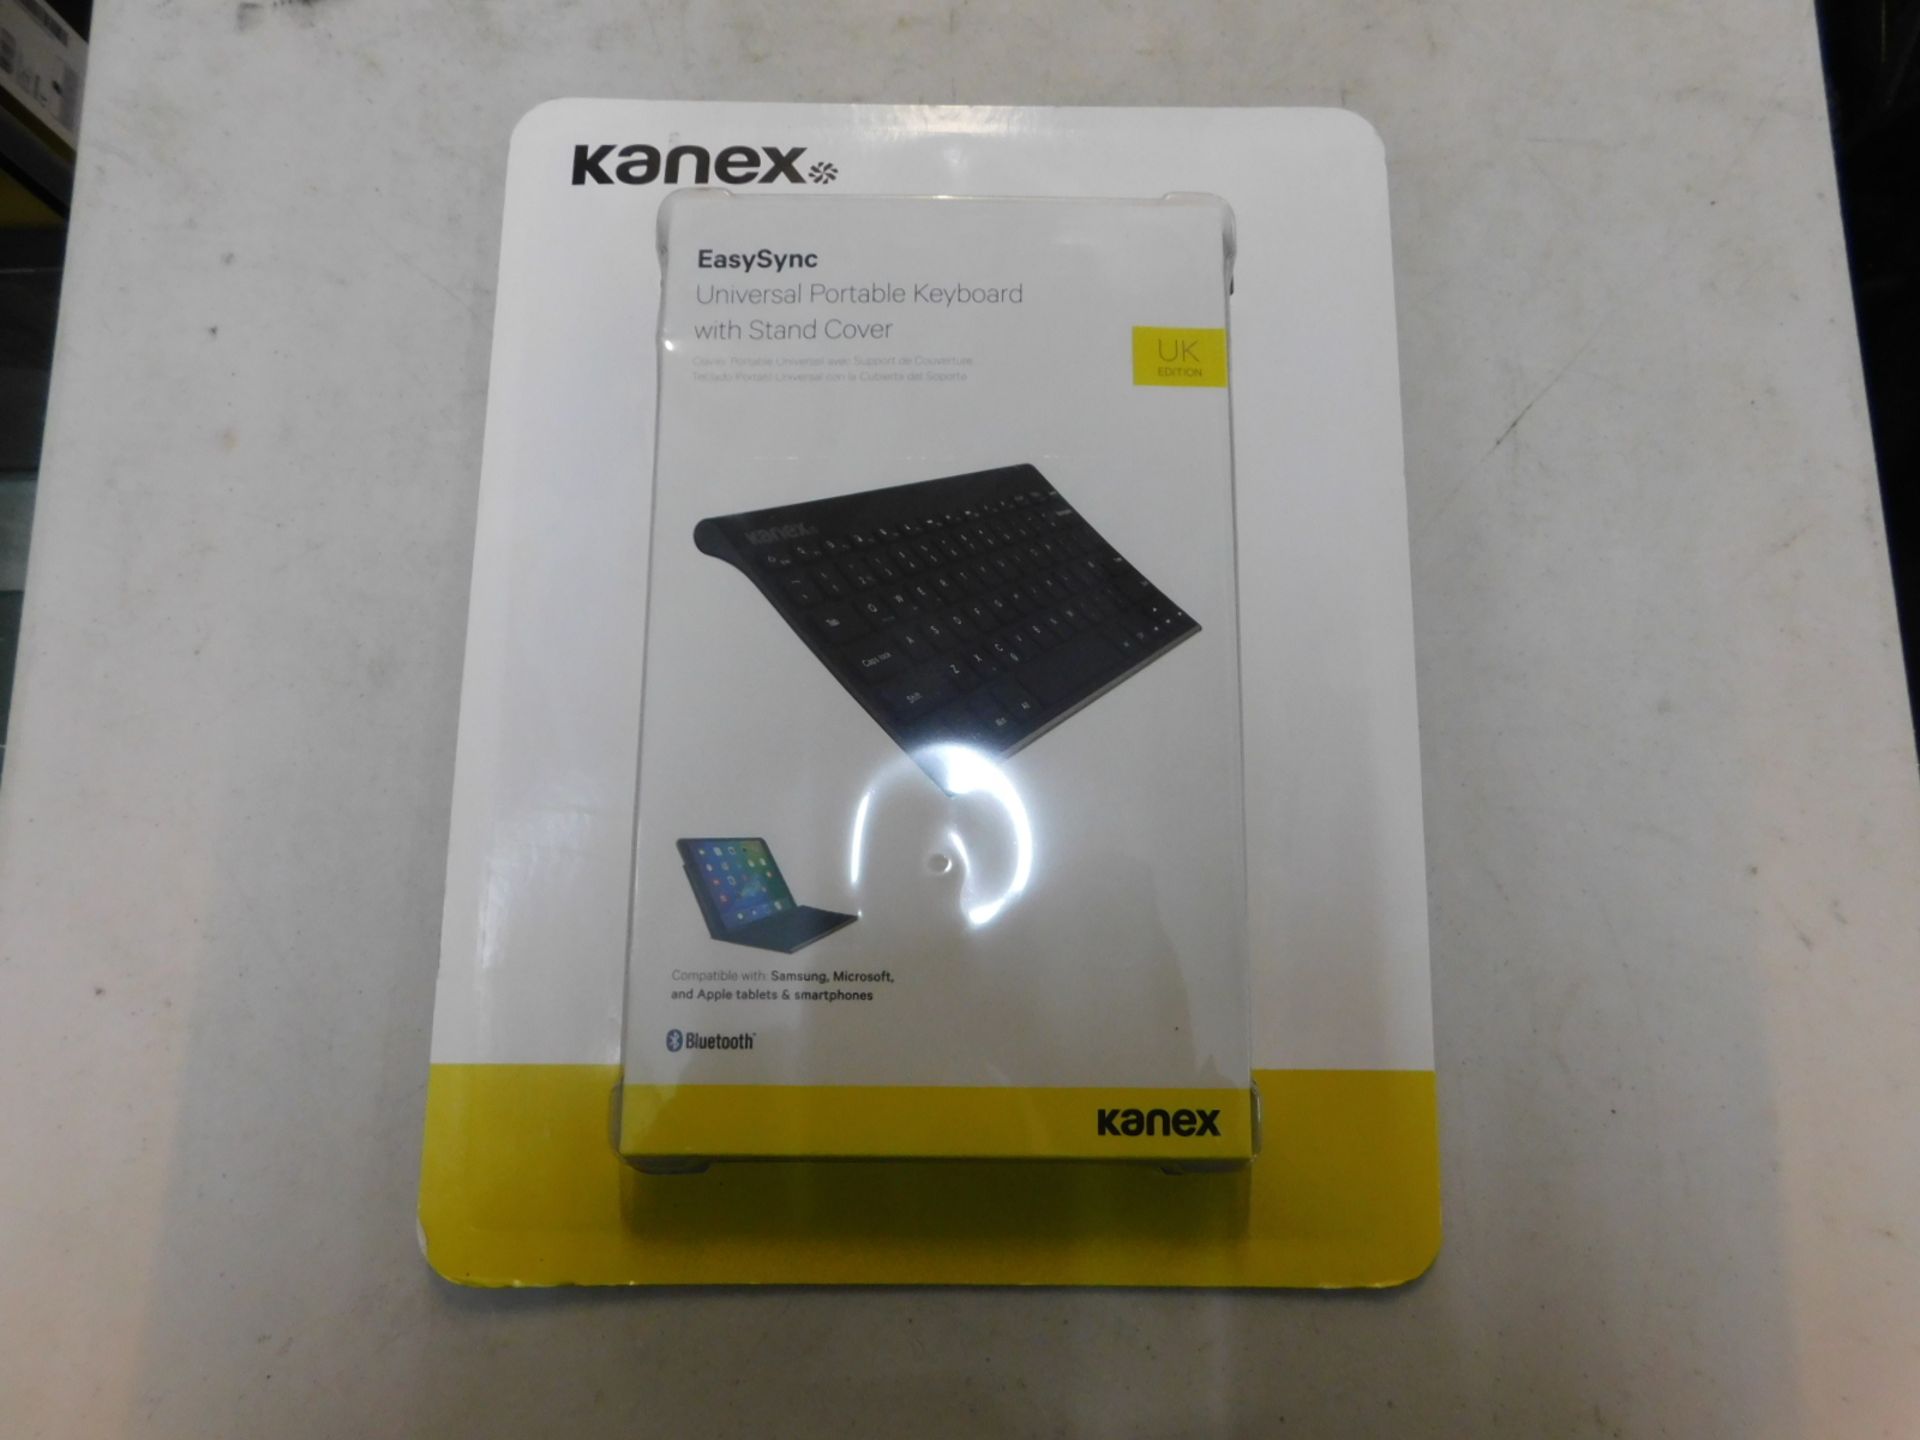 1 BOXED KANEX EASY SYNC UNIVERSAL PORTABLE KEYBOARD WITH COVER RRP Â£49.99